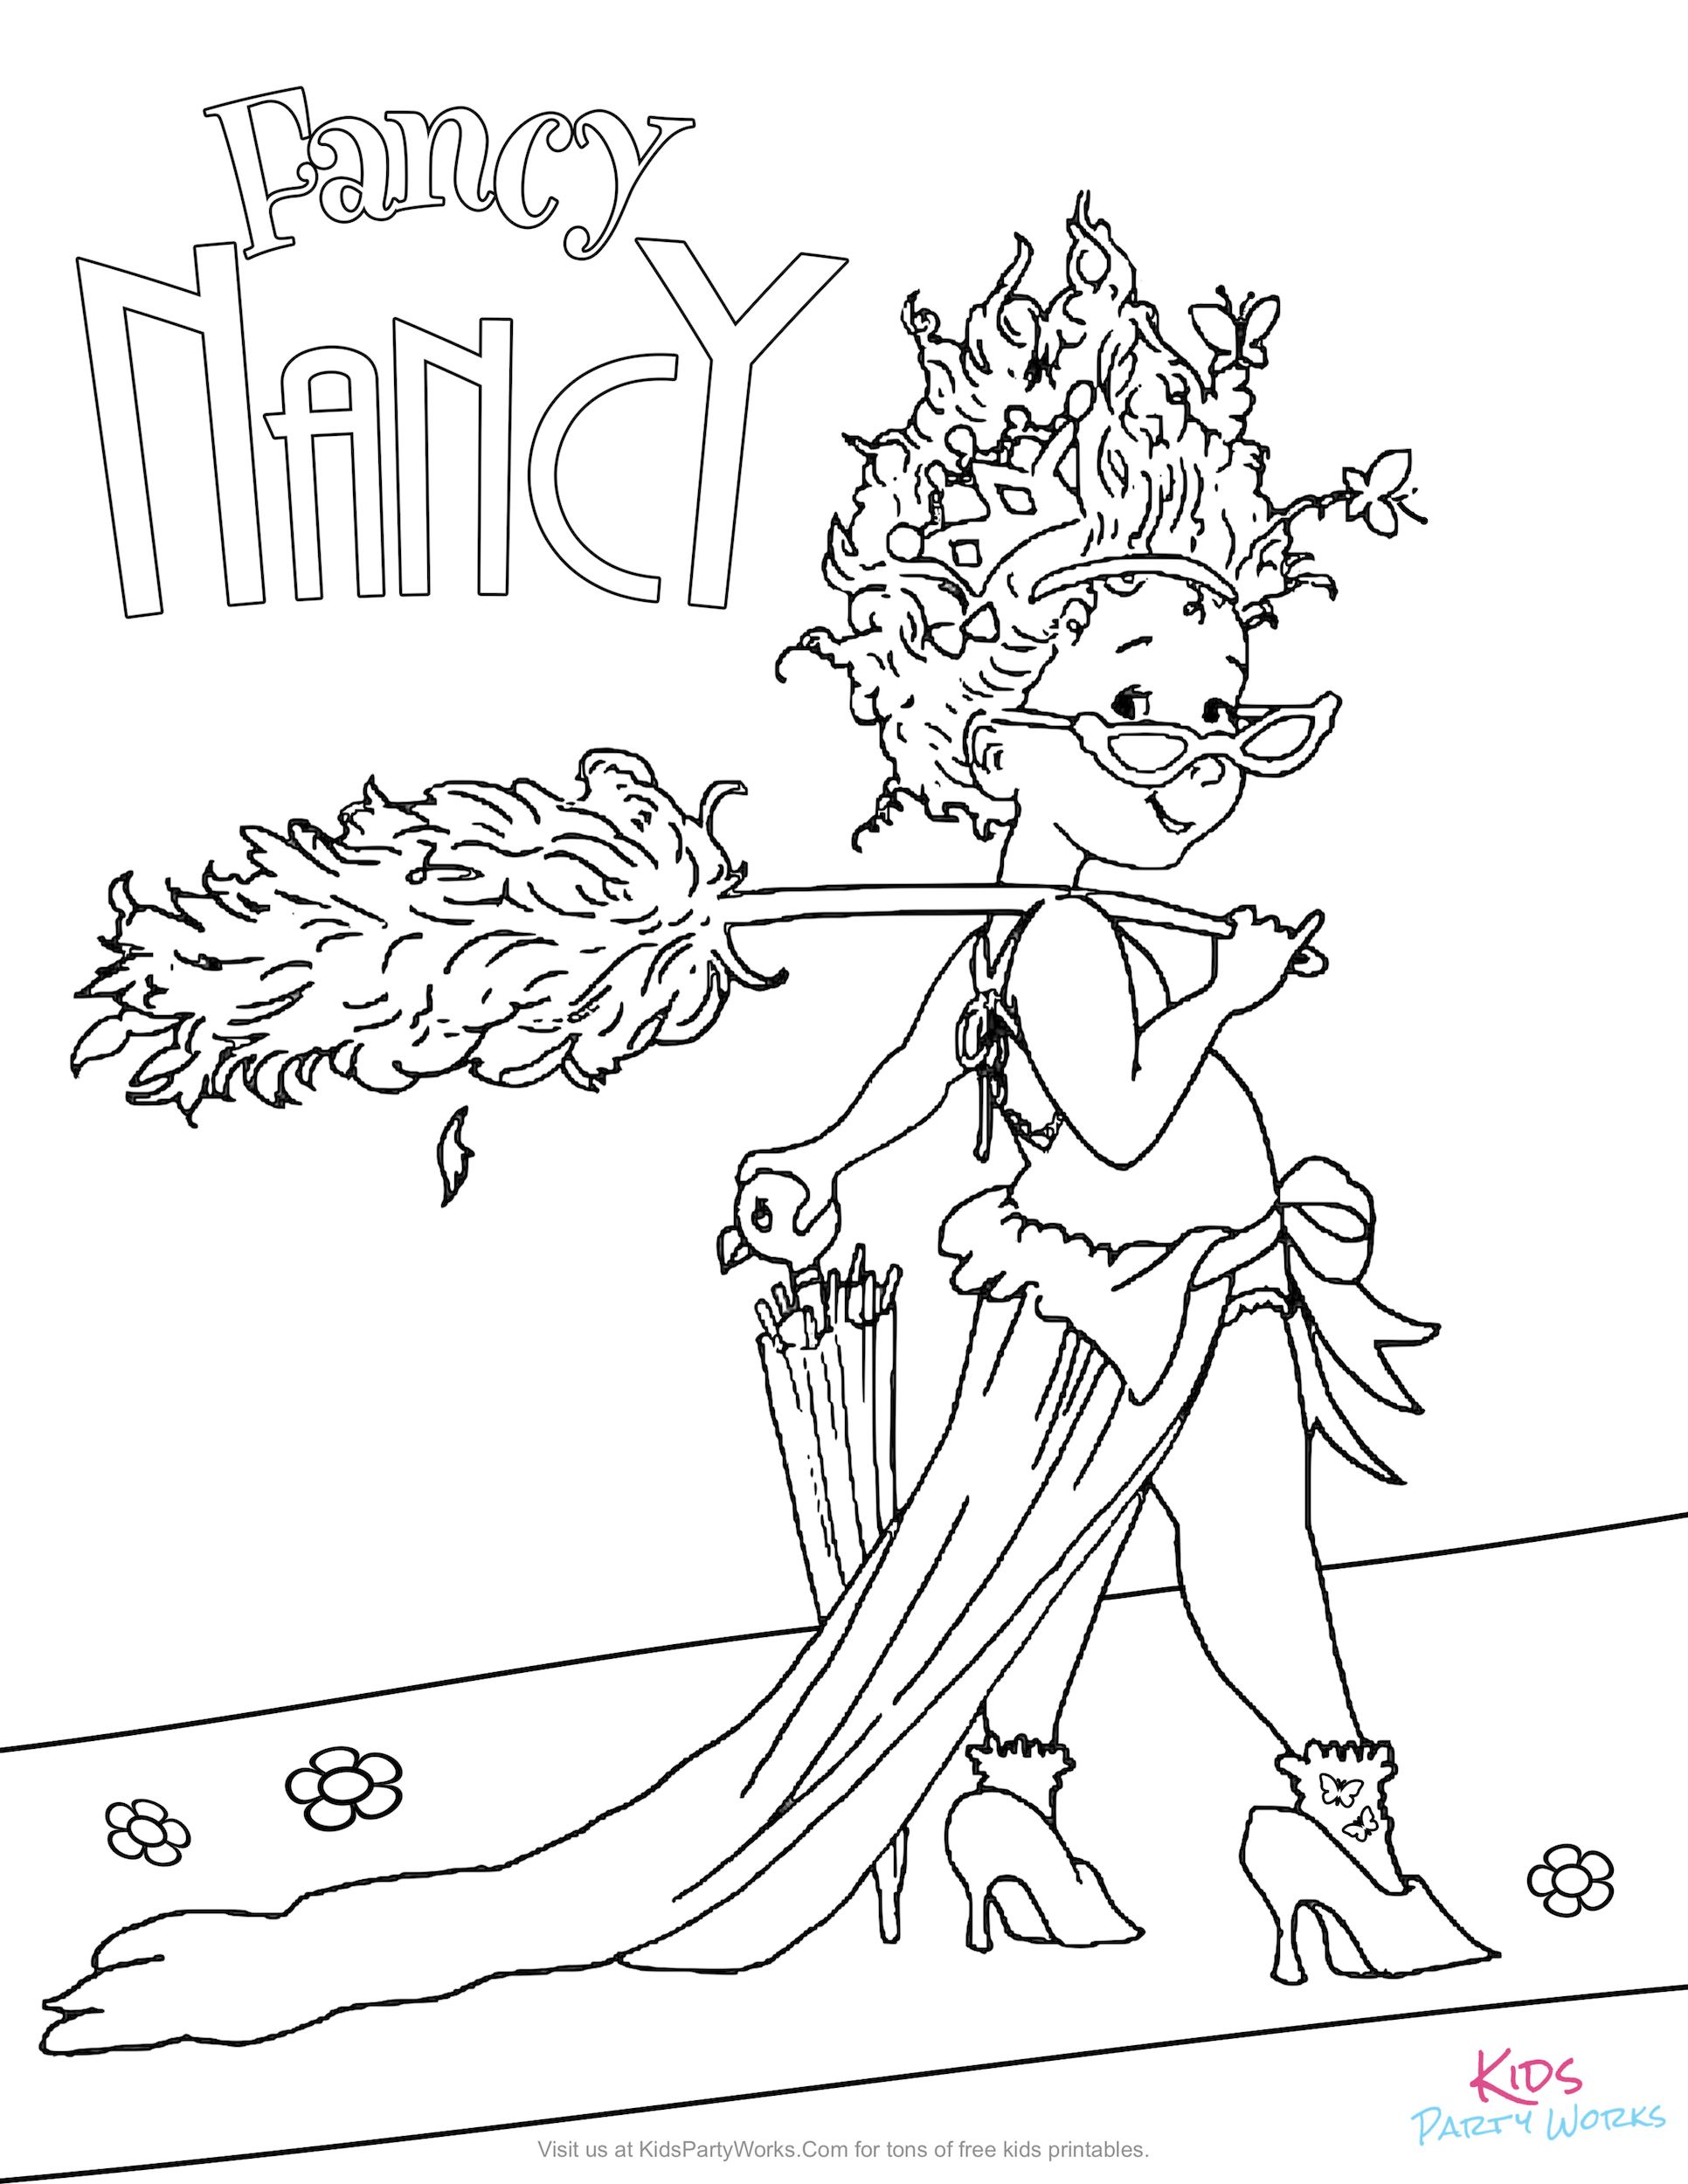 Free Fancy Nancy coloring page for kids to color from the new Disney Jr. show.